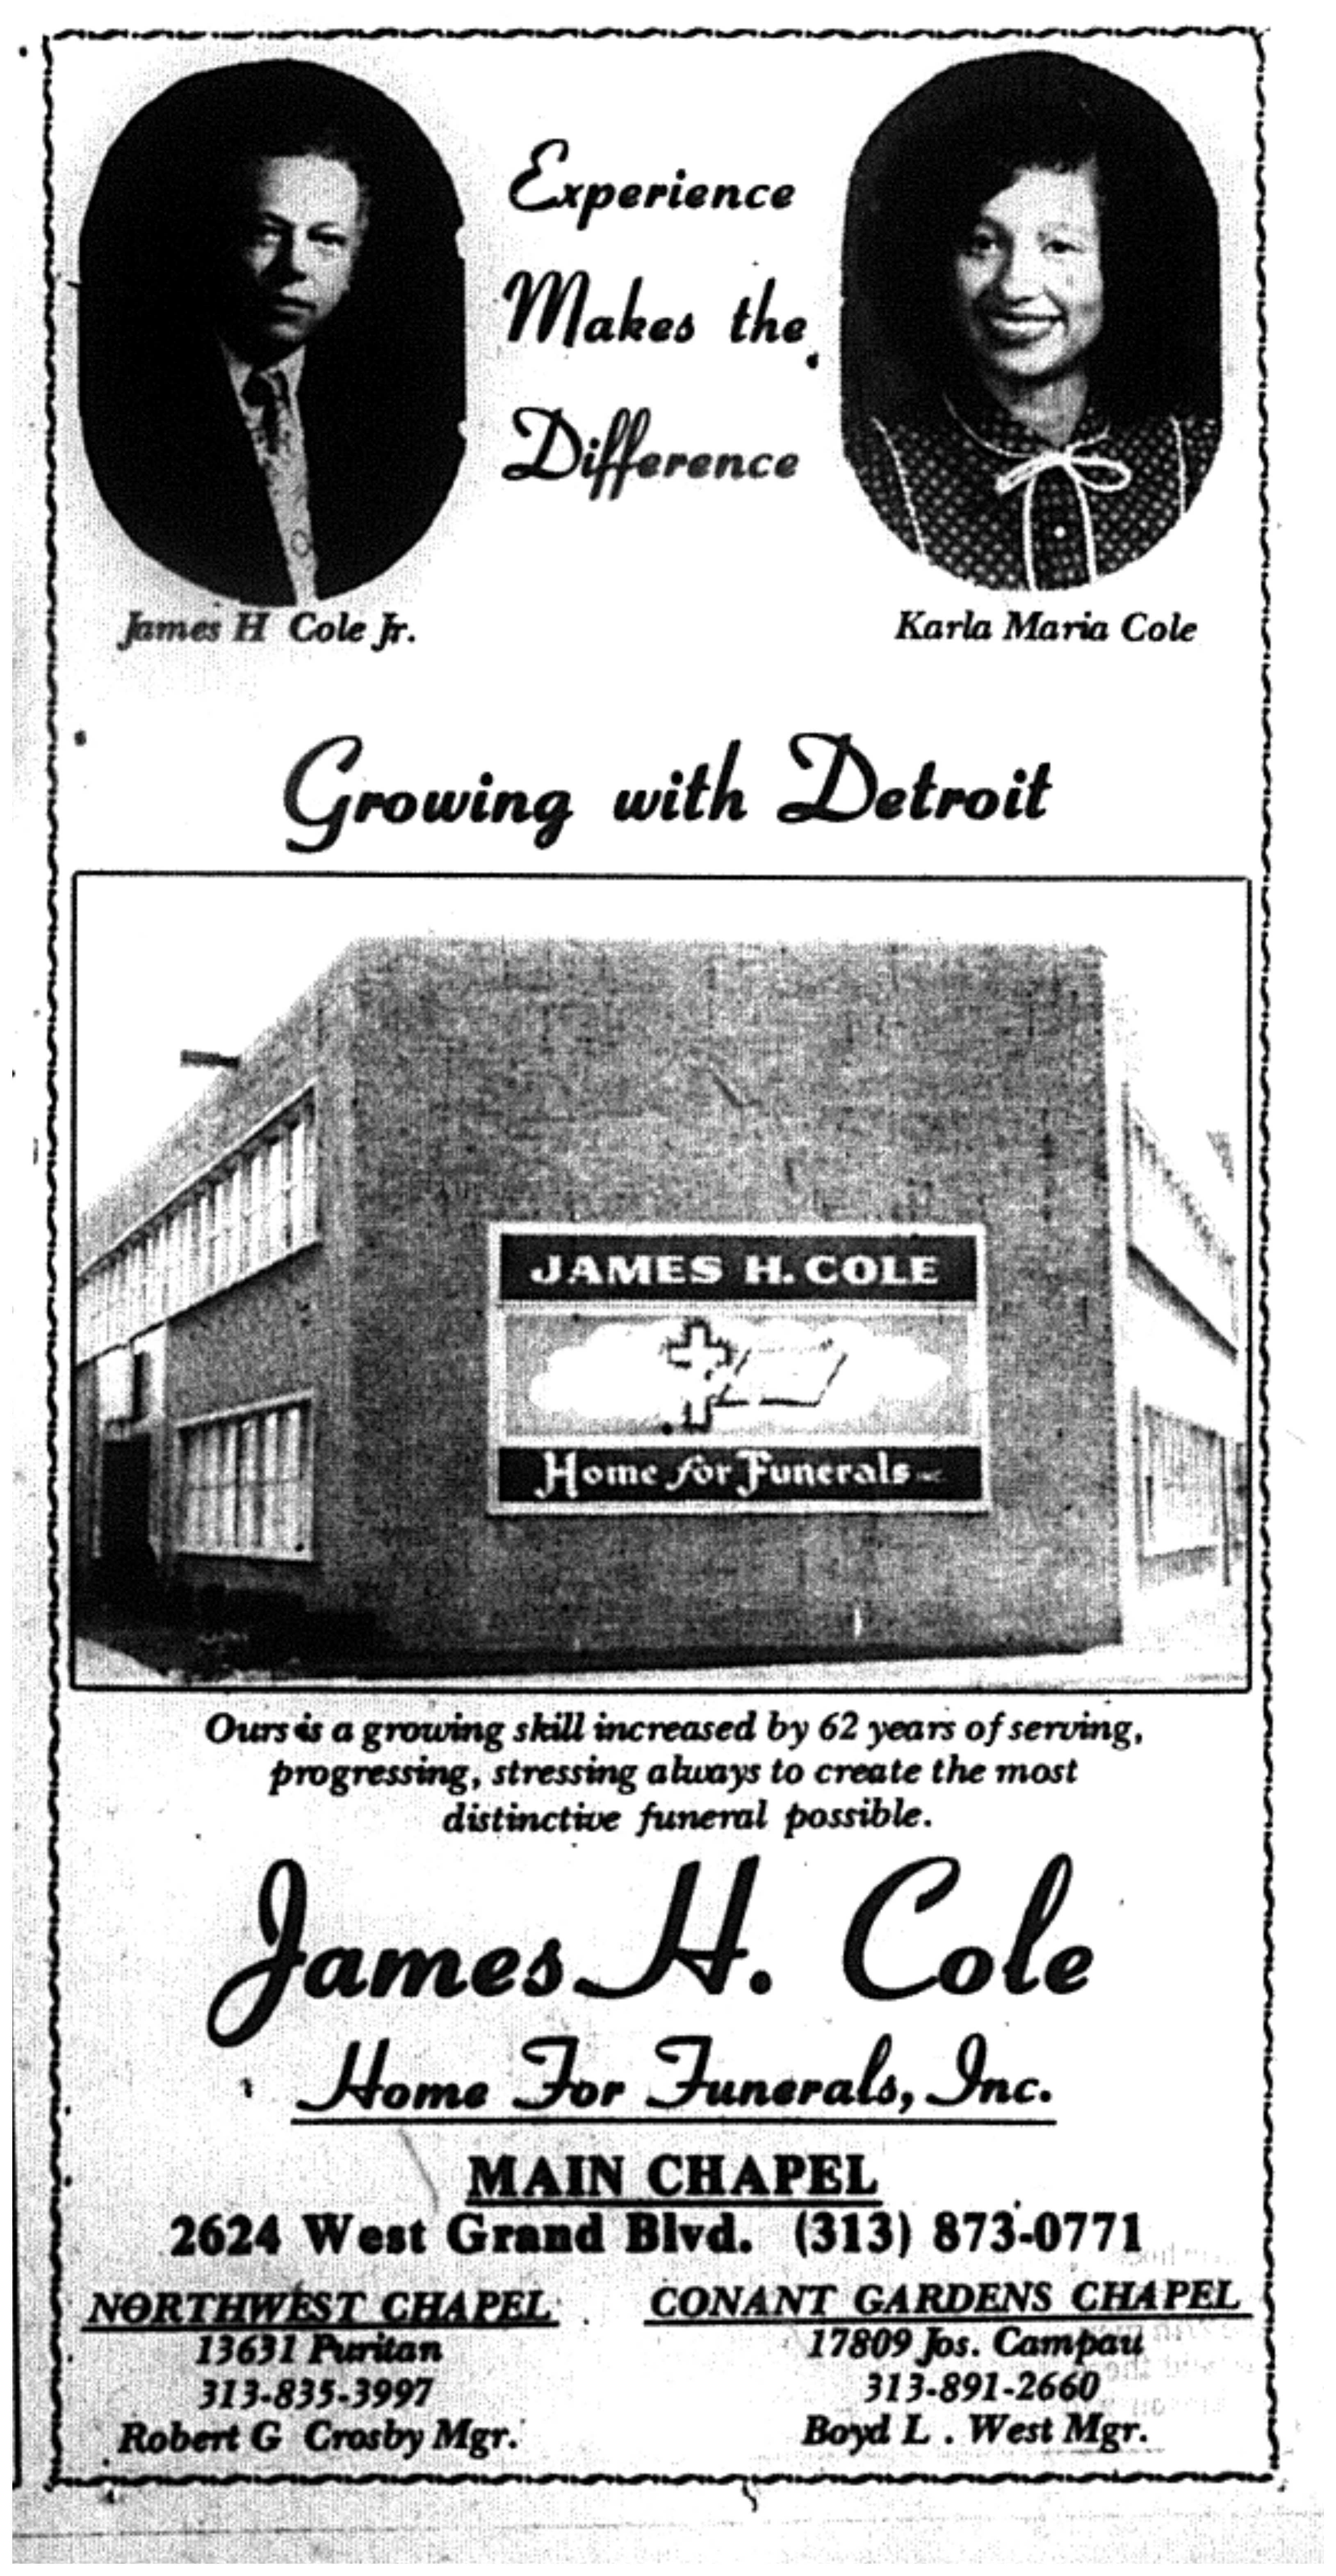 James H. Cole & Charles T. Cole | The Business of Black Death in Detroit